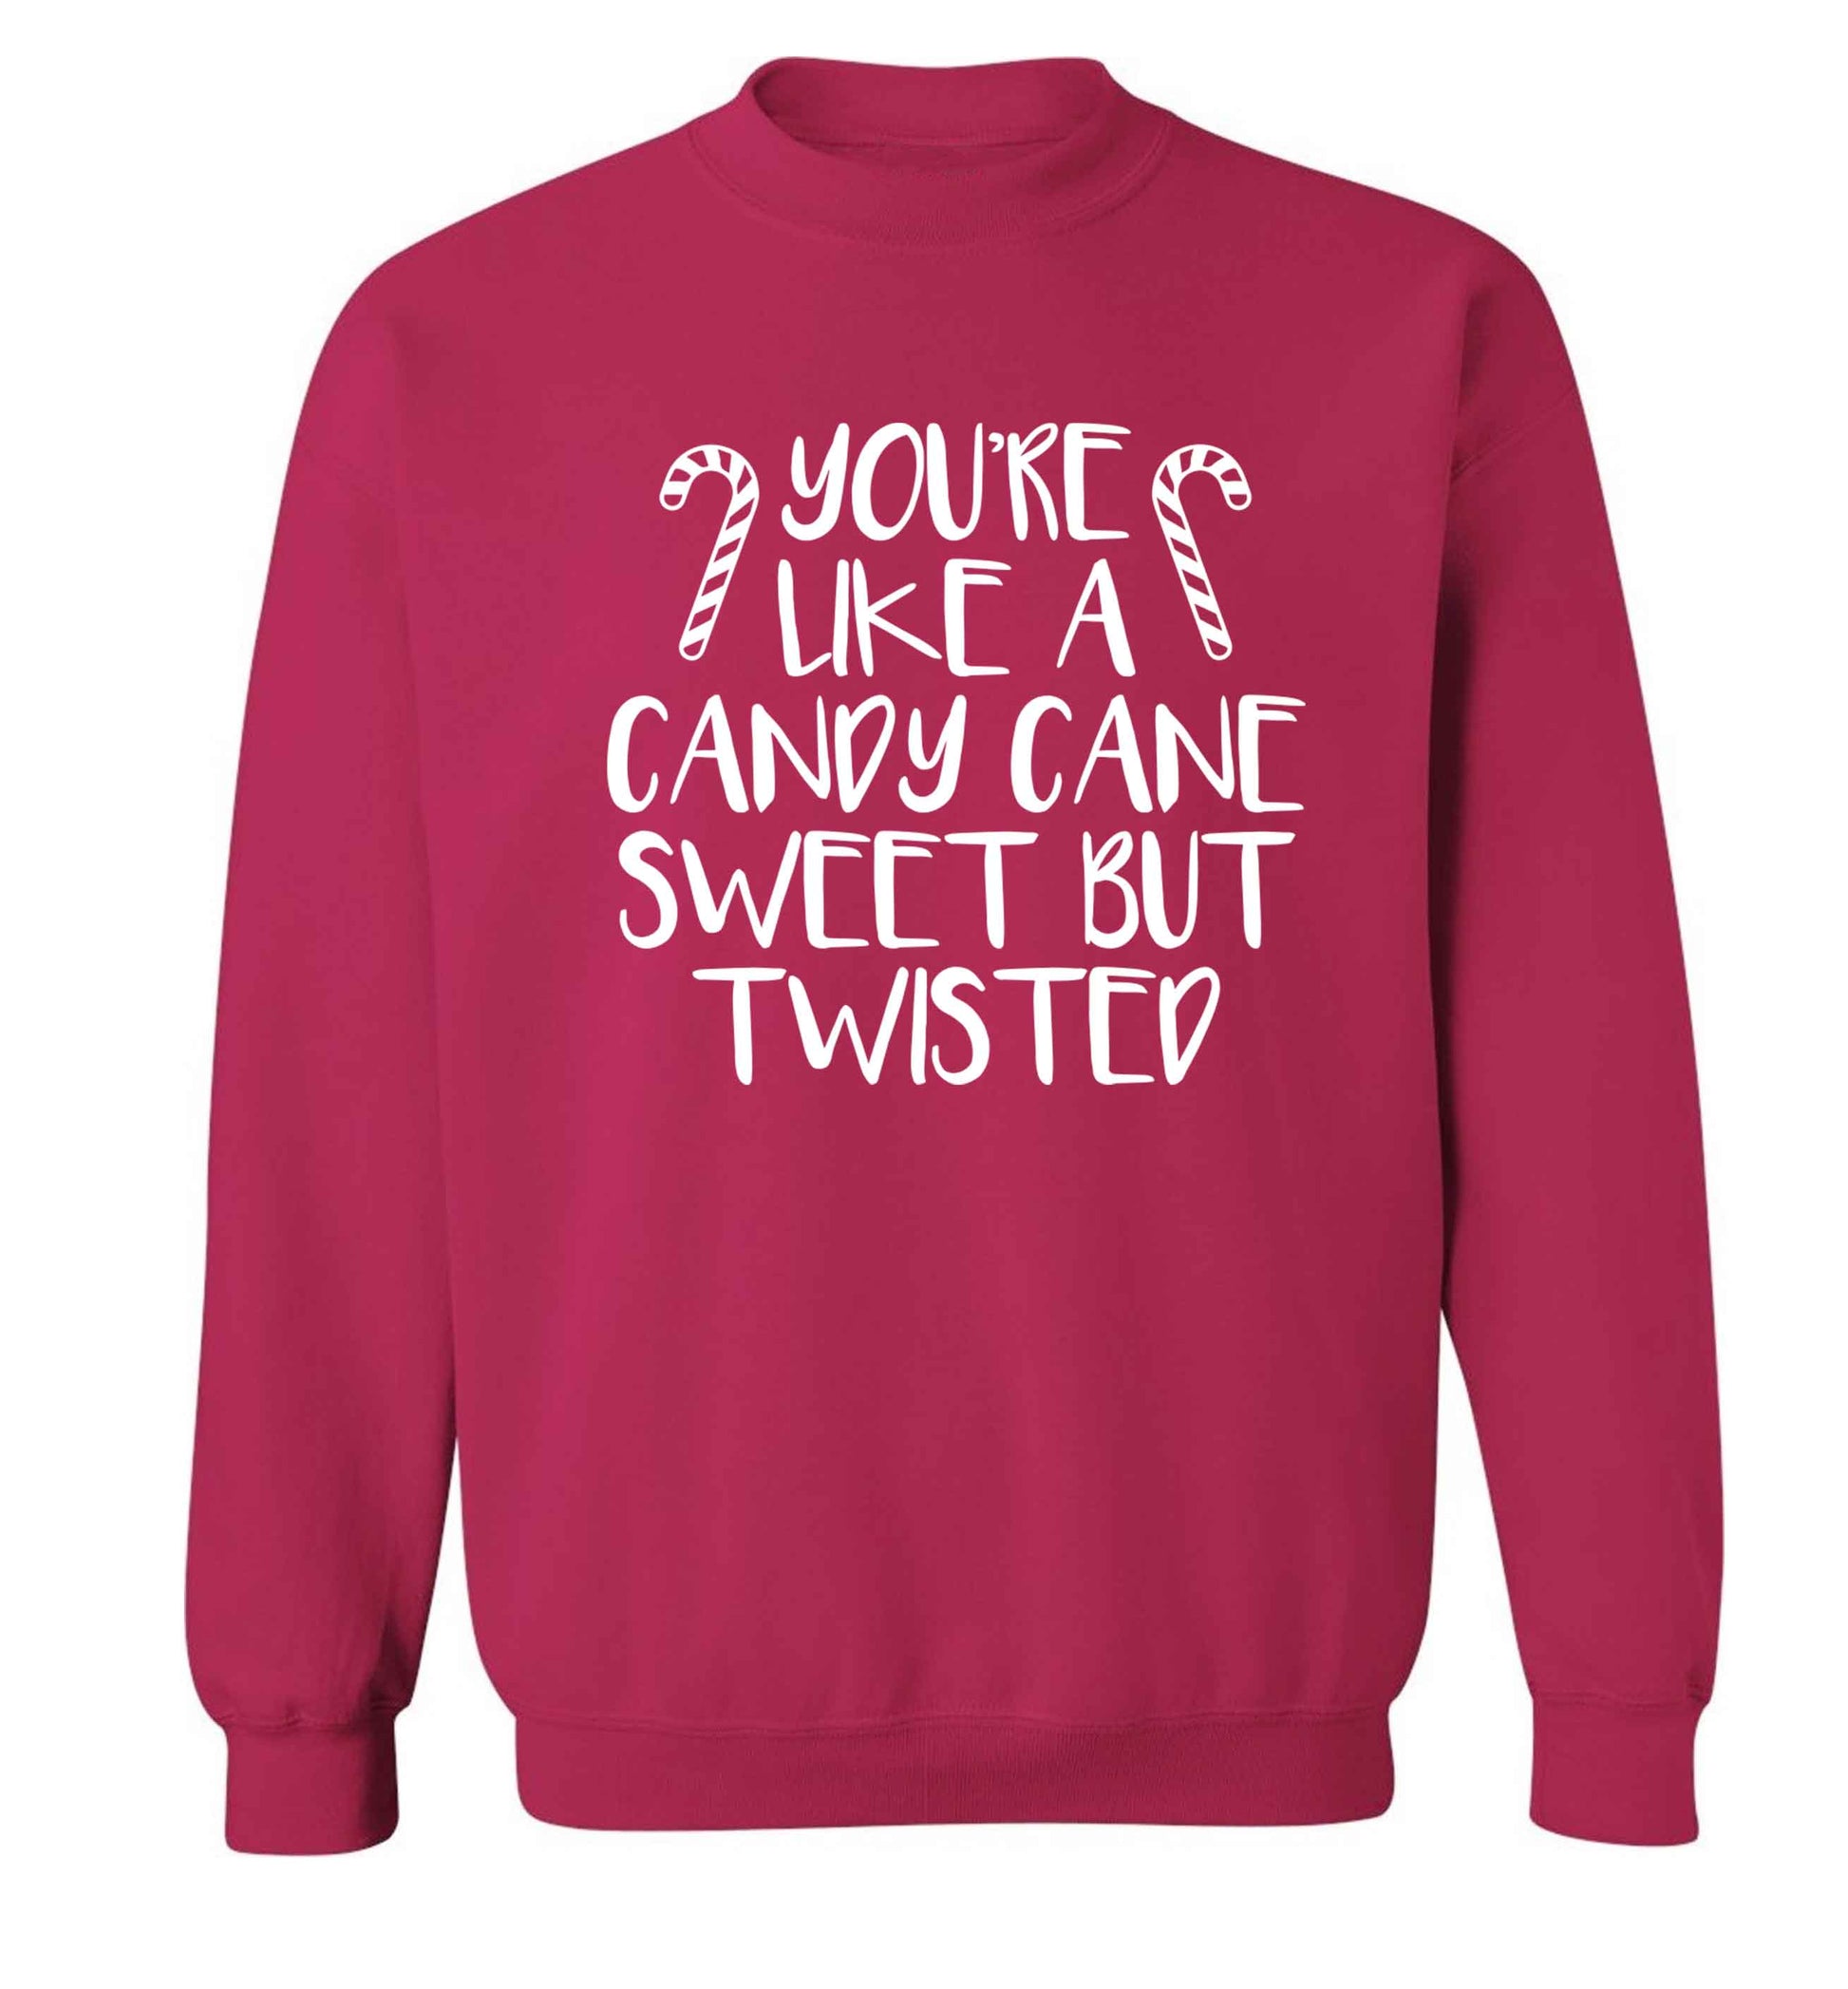 You're like a candy cane sweet but twisted Adult's unisex pink Sweater 2XL